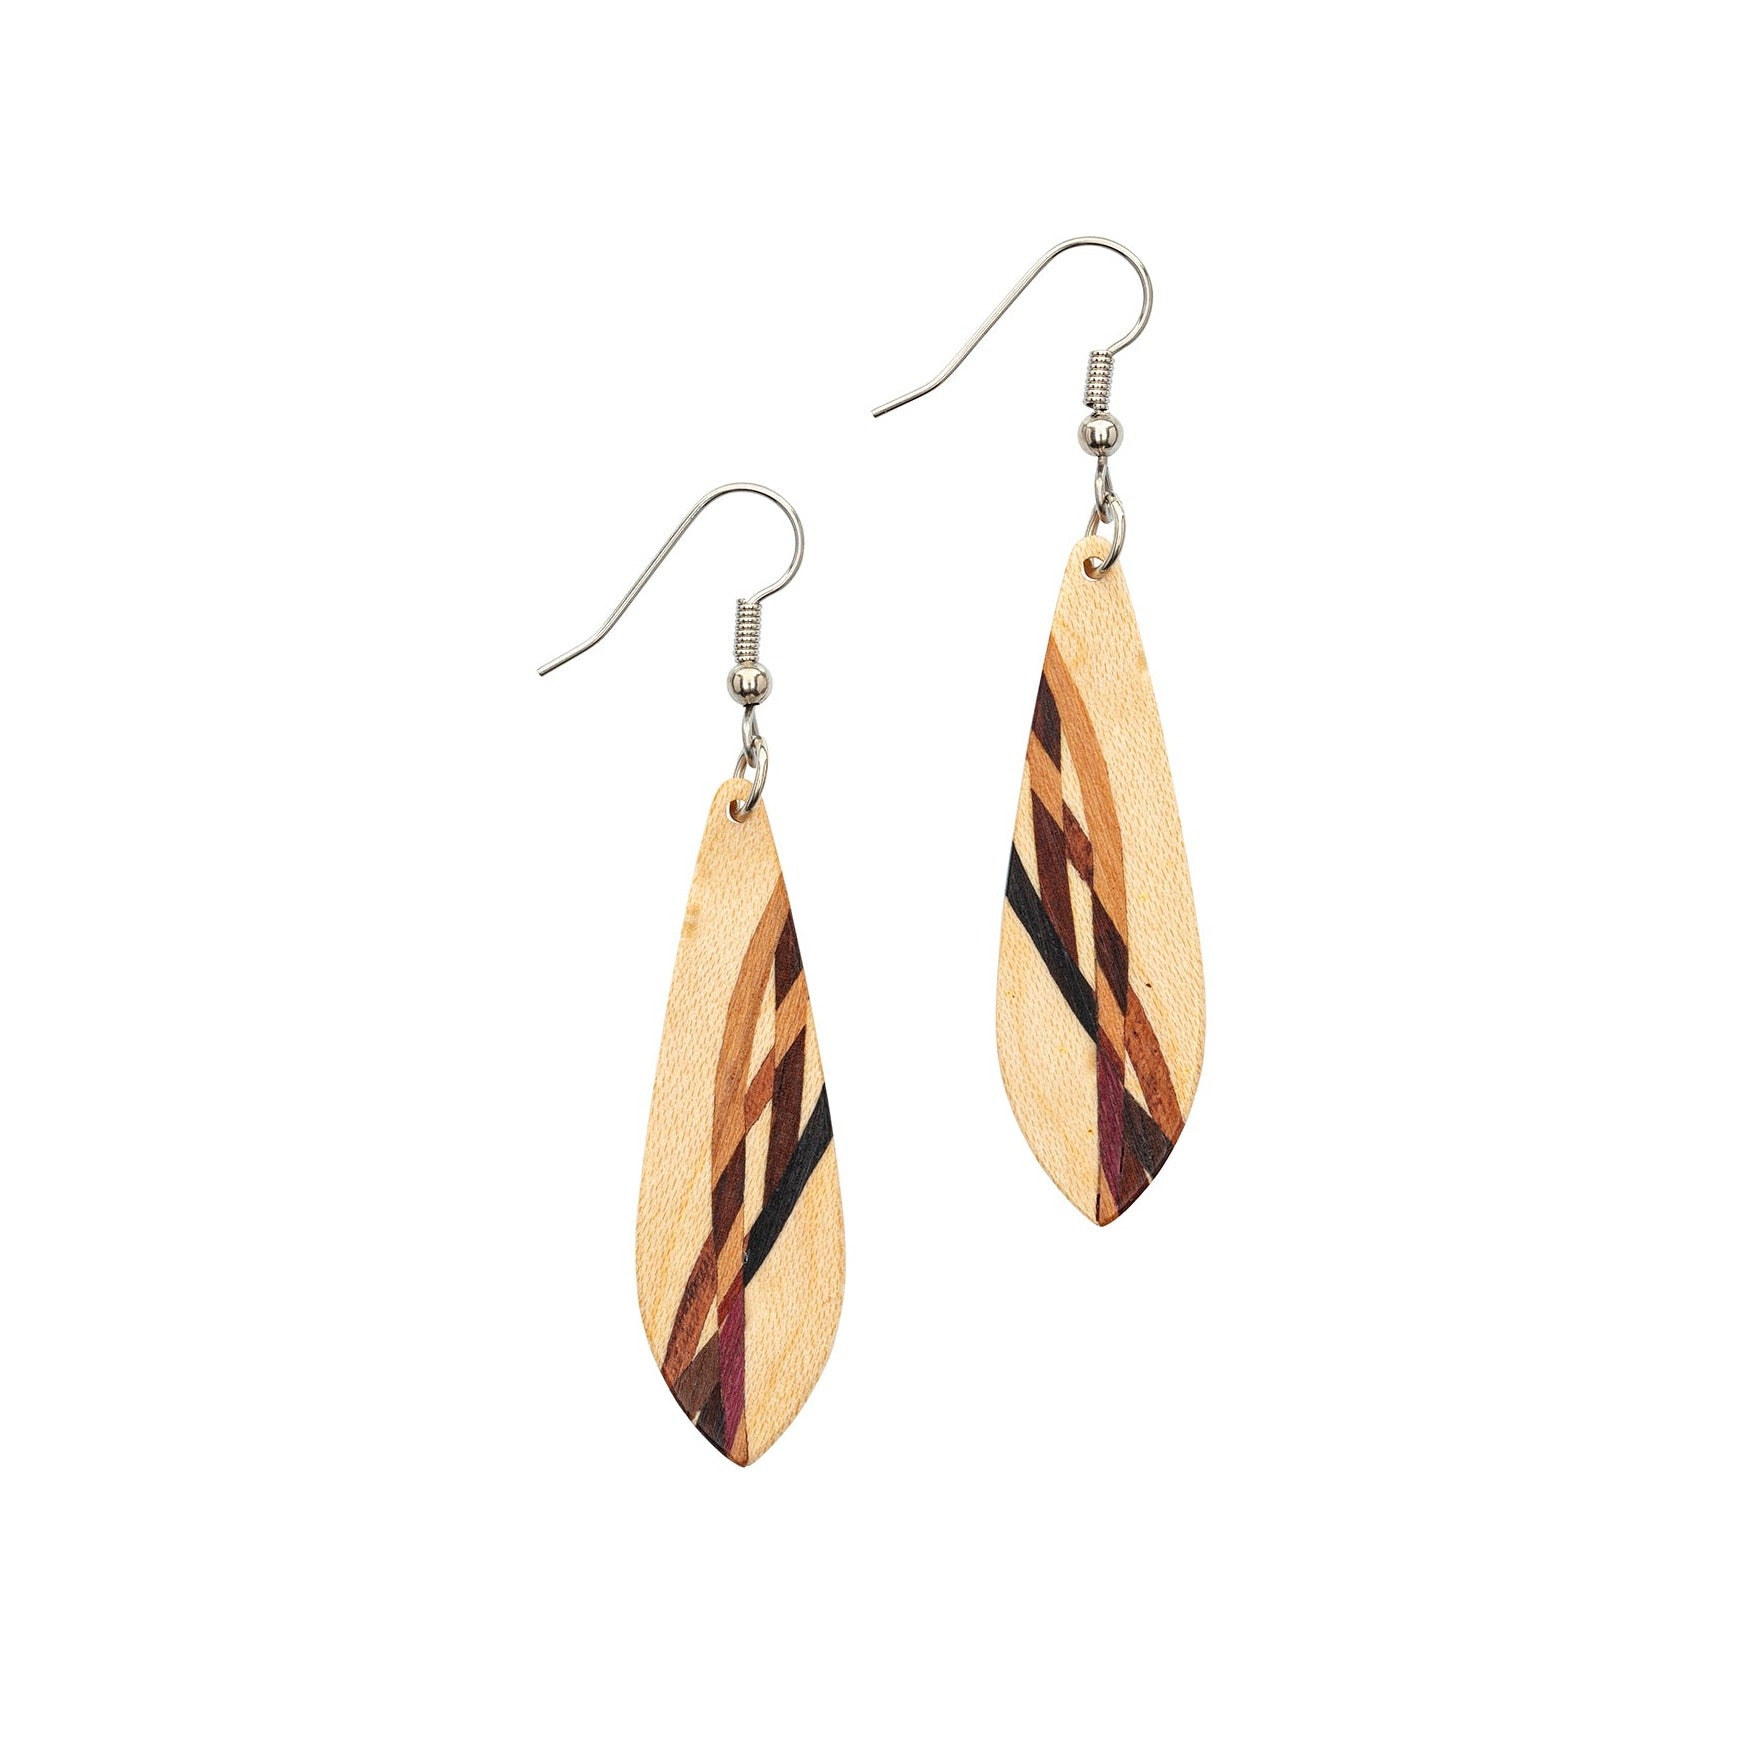 Inlay earrings marquis large